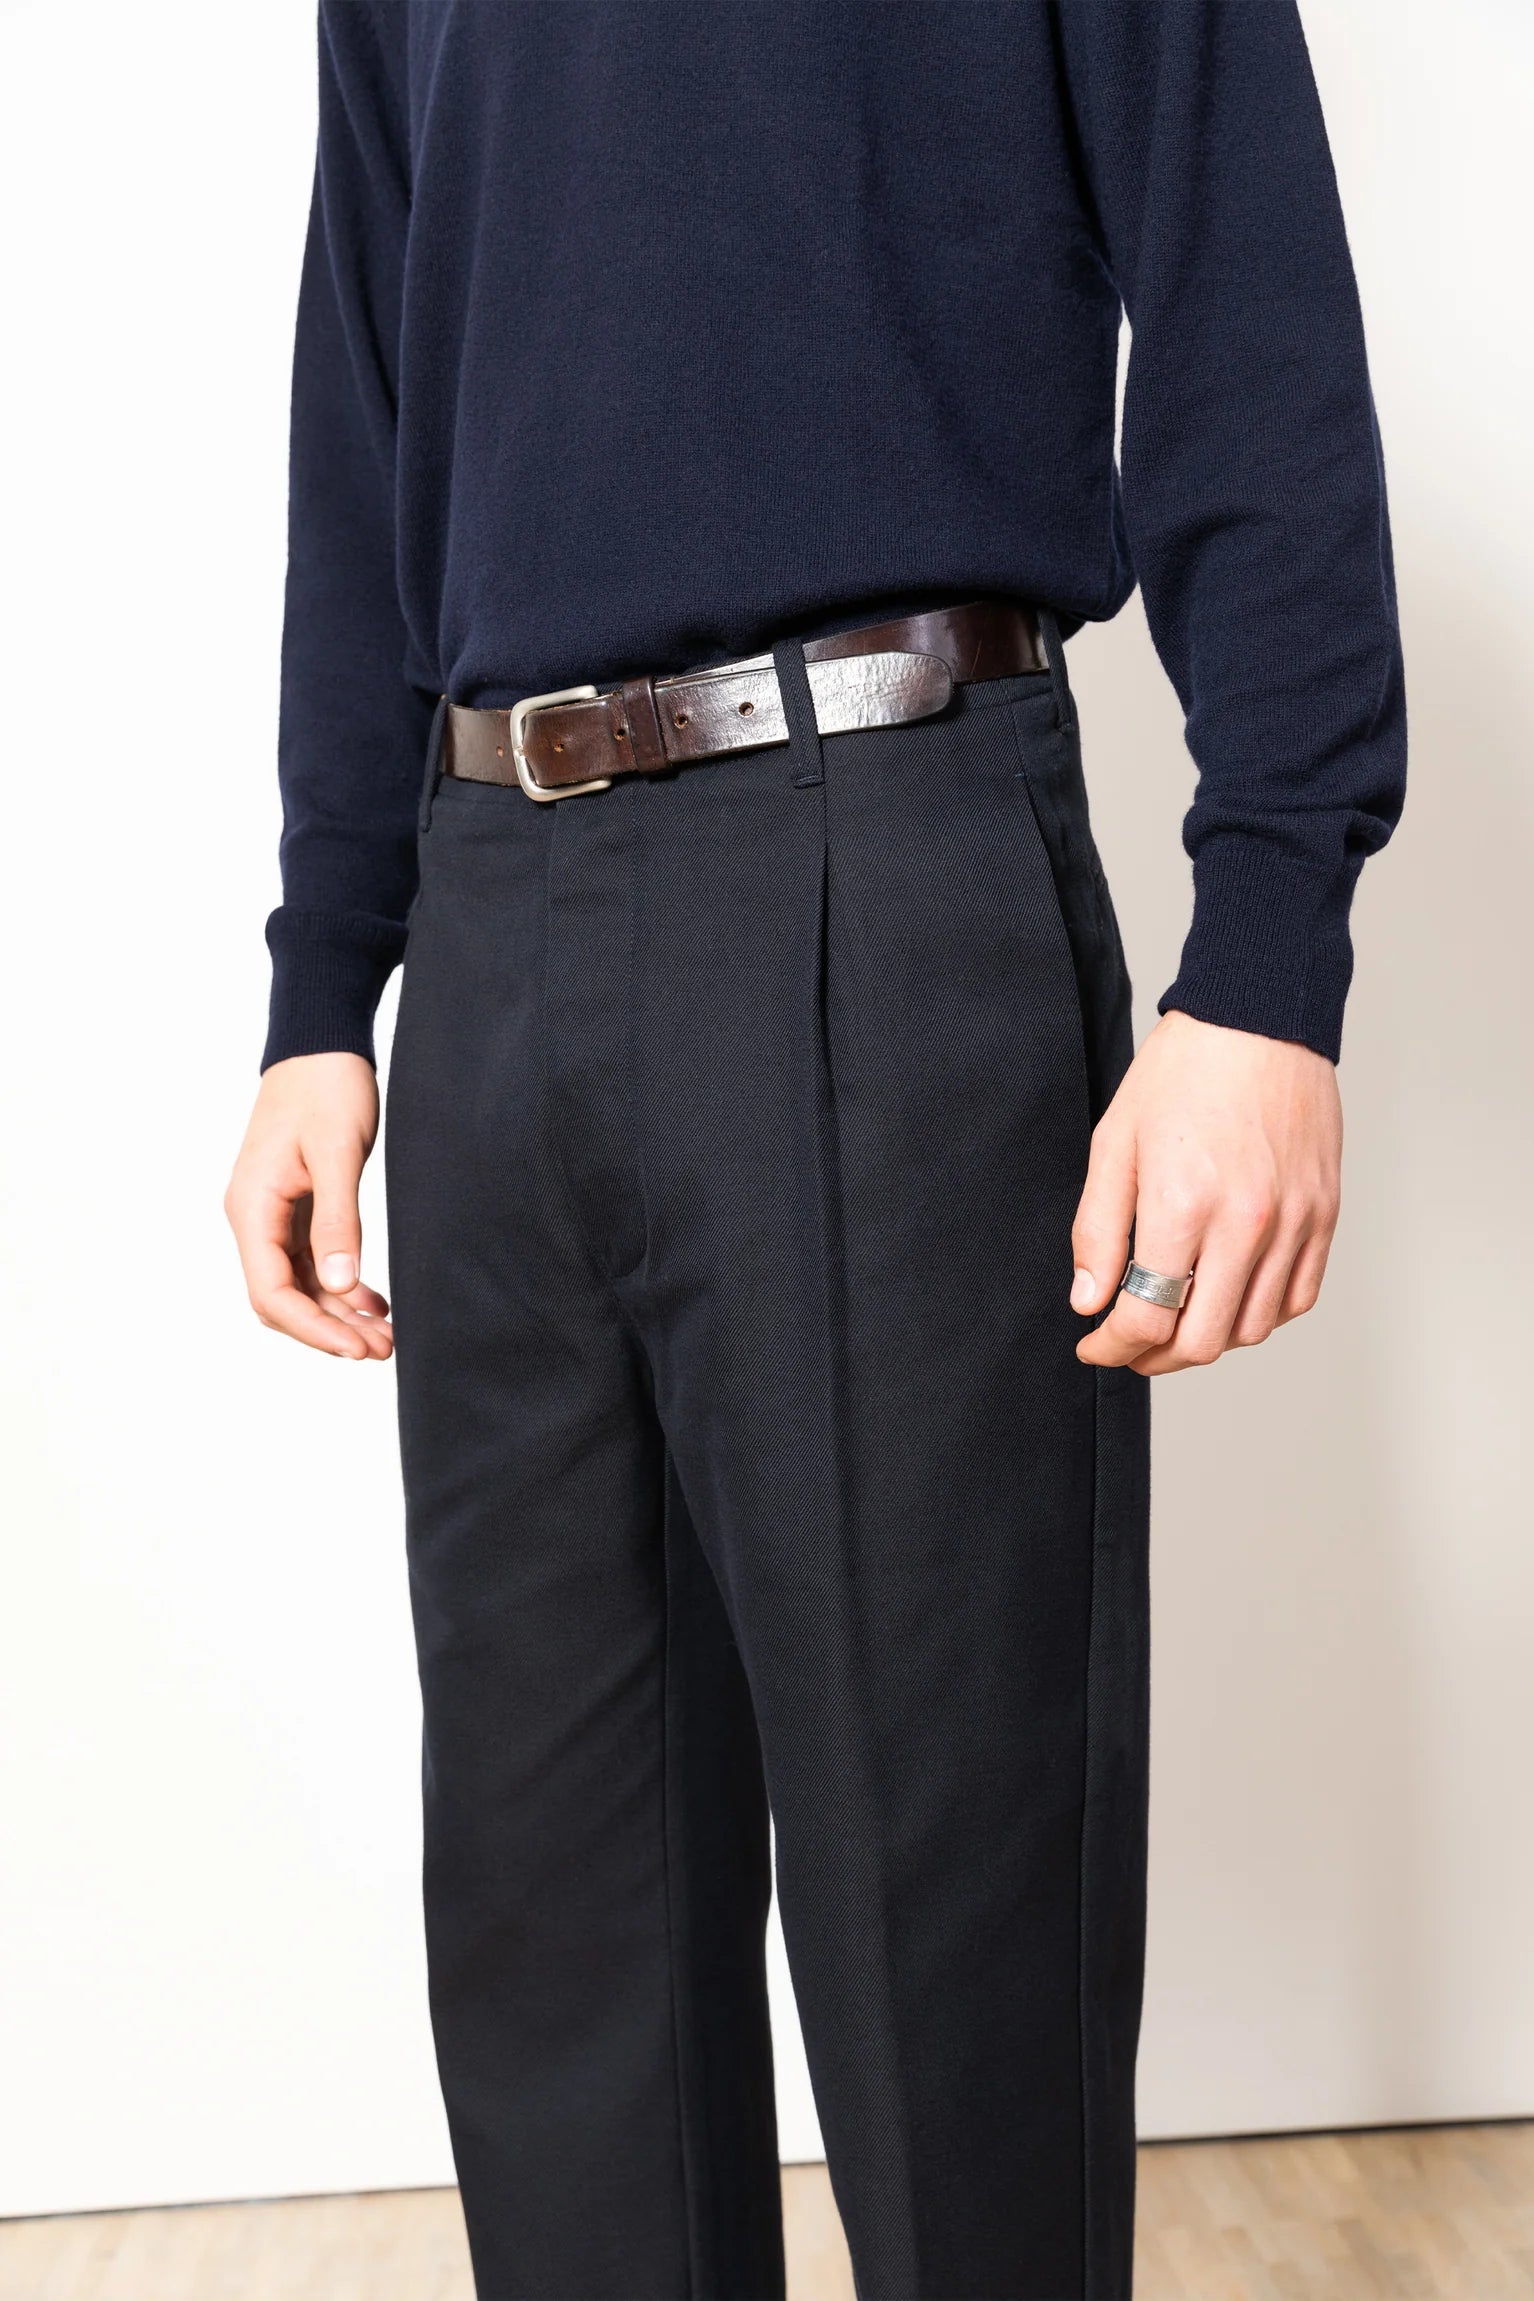 7d 'Hundred Six' Pleated Trousers